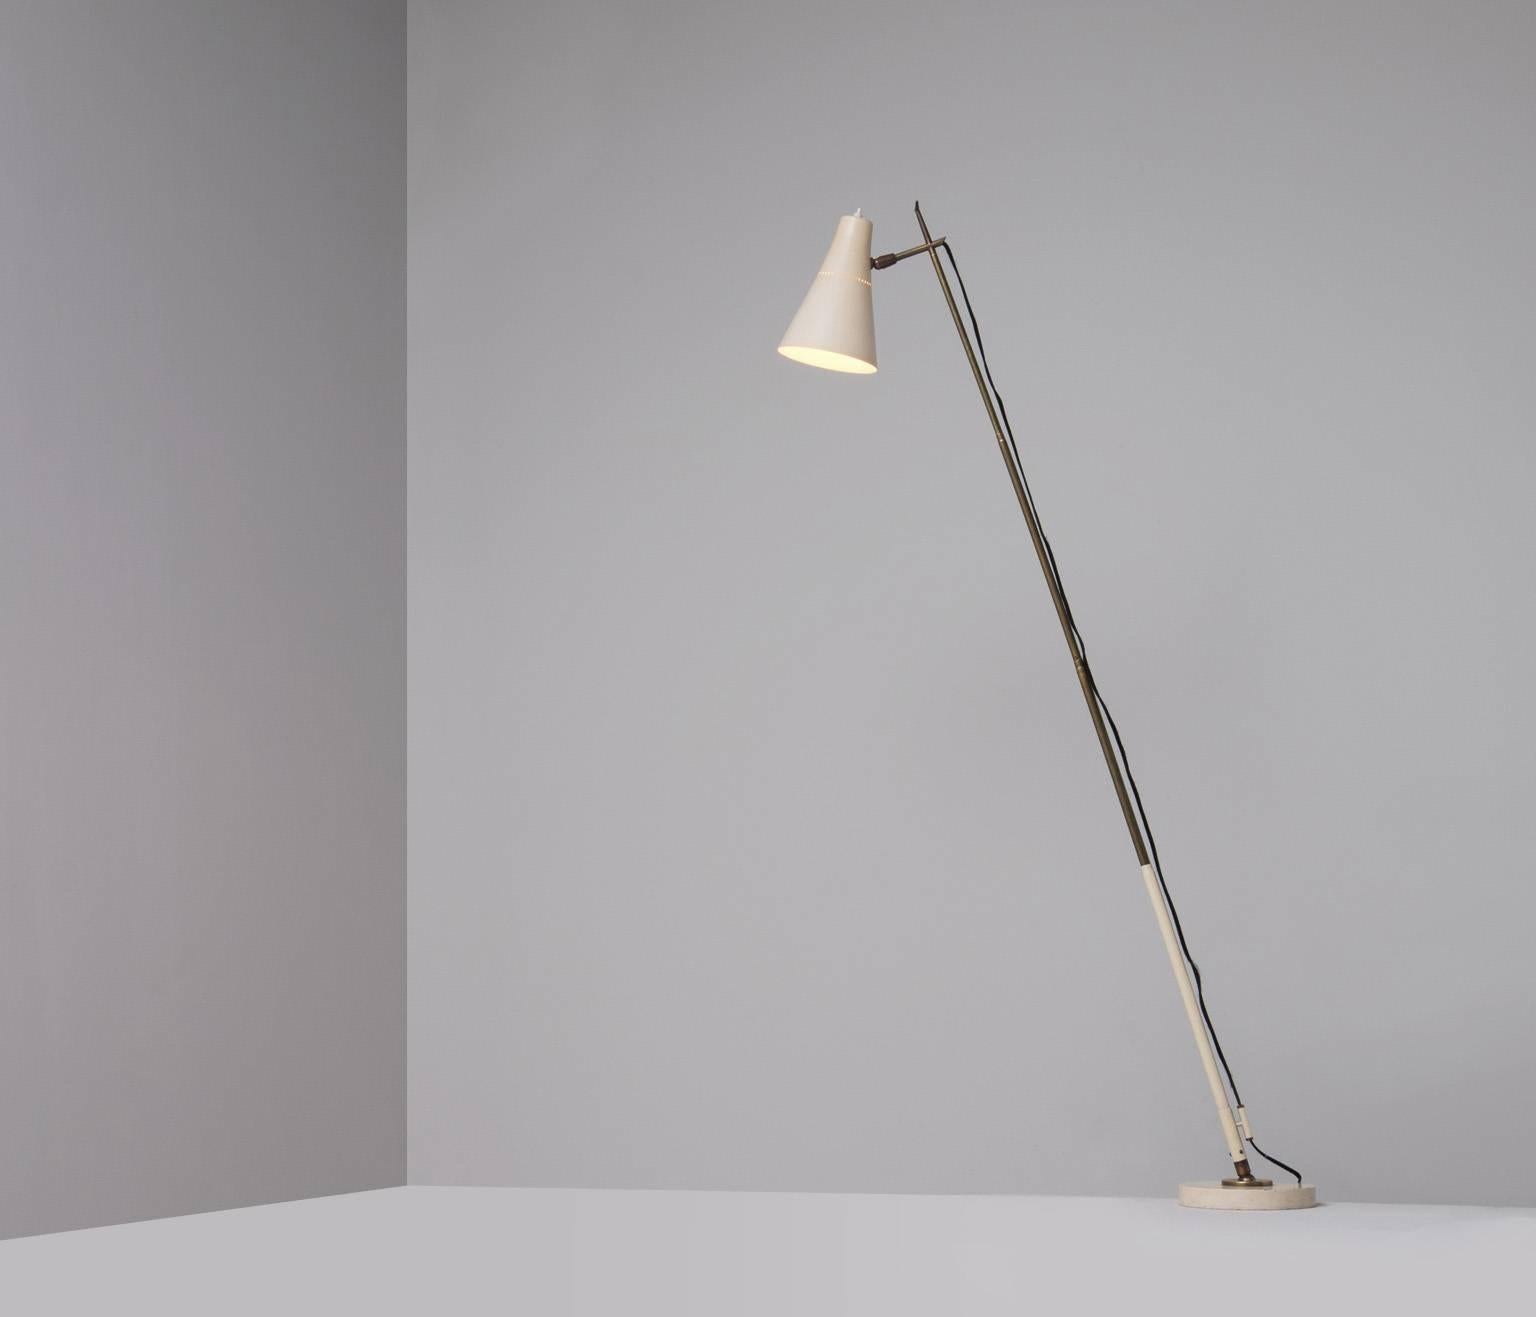 Rare adjustable table / floor lamp - model 201 - designed by Giuseppe Ostuni for O-Luce. Unique telescopic arm made of brass allows the lamp to be used either as a table lamp or floor lamp. 

The round base matches perfectly with the painted metal